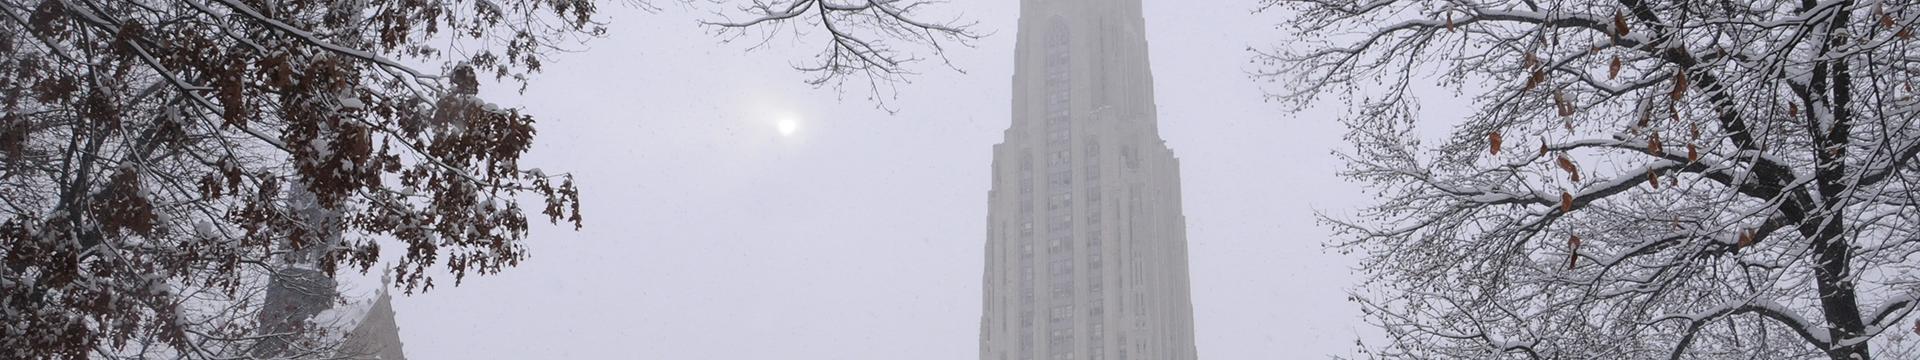 Snowy picture of the Cathedral of Learning at the University of Pittsburgh.